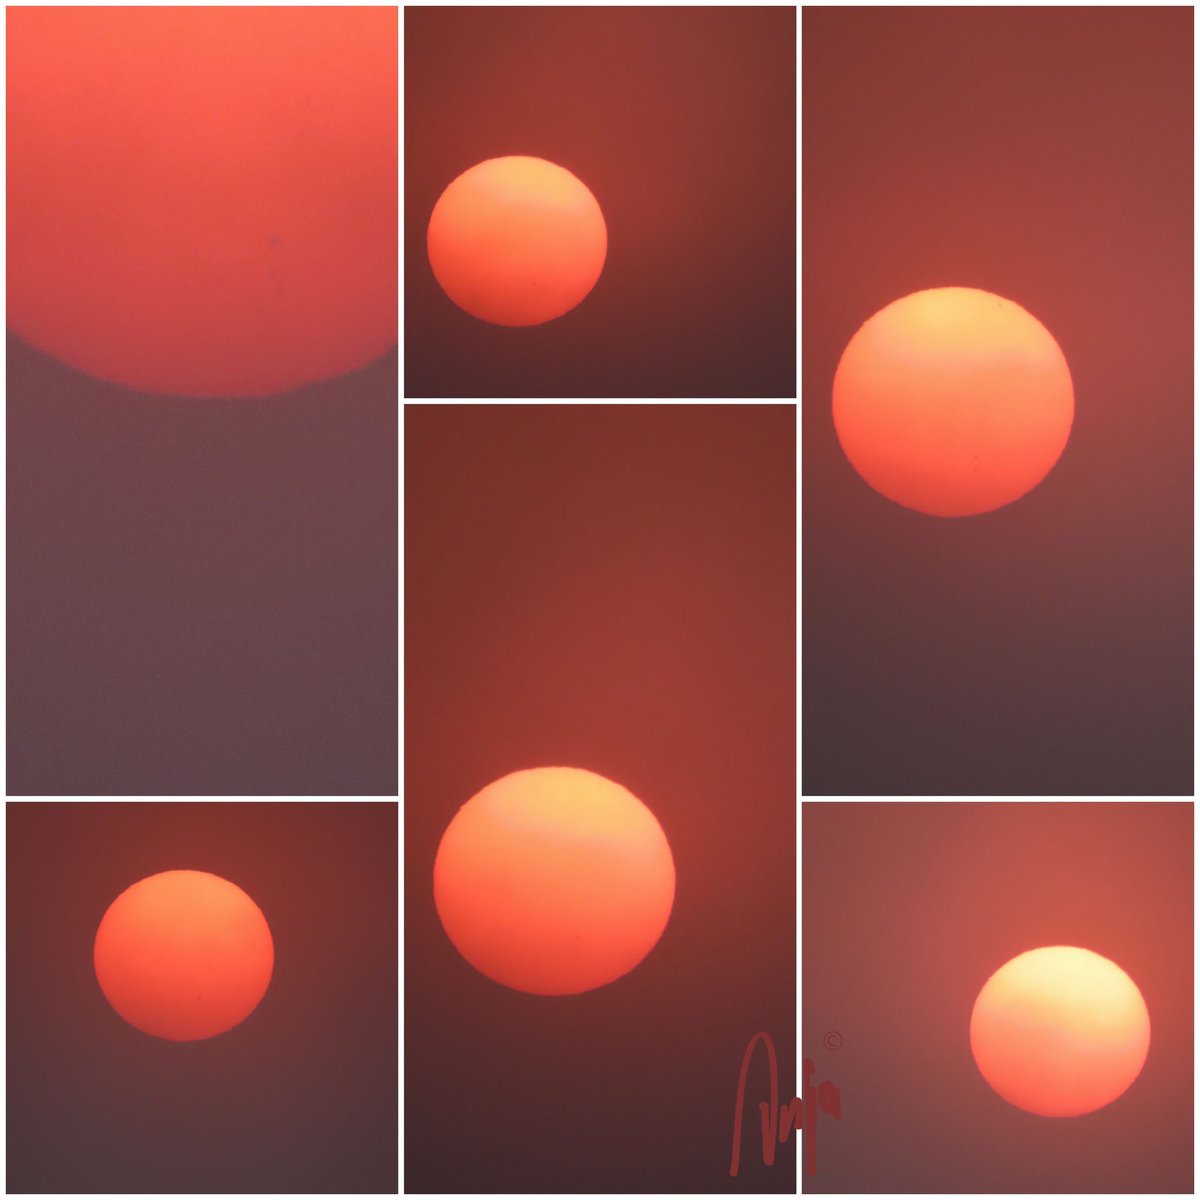 When you cannot choose which photo you like best 🤣
#sunset #photography #nature #outdoors #NaturePhotography #NaturePhotography #natureisart #sun #ColourSplash 
#Botswana #Africa